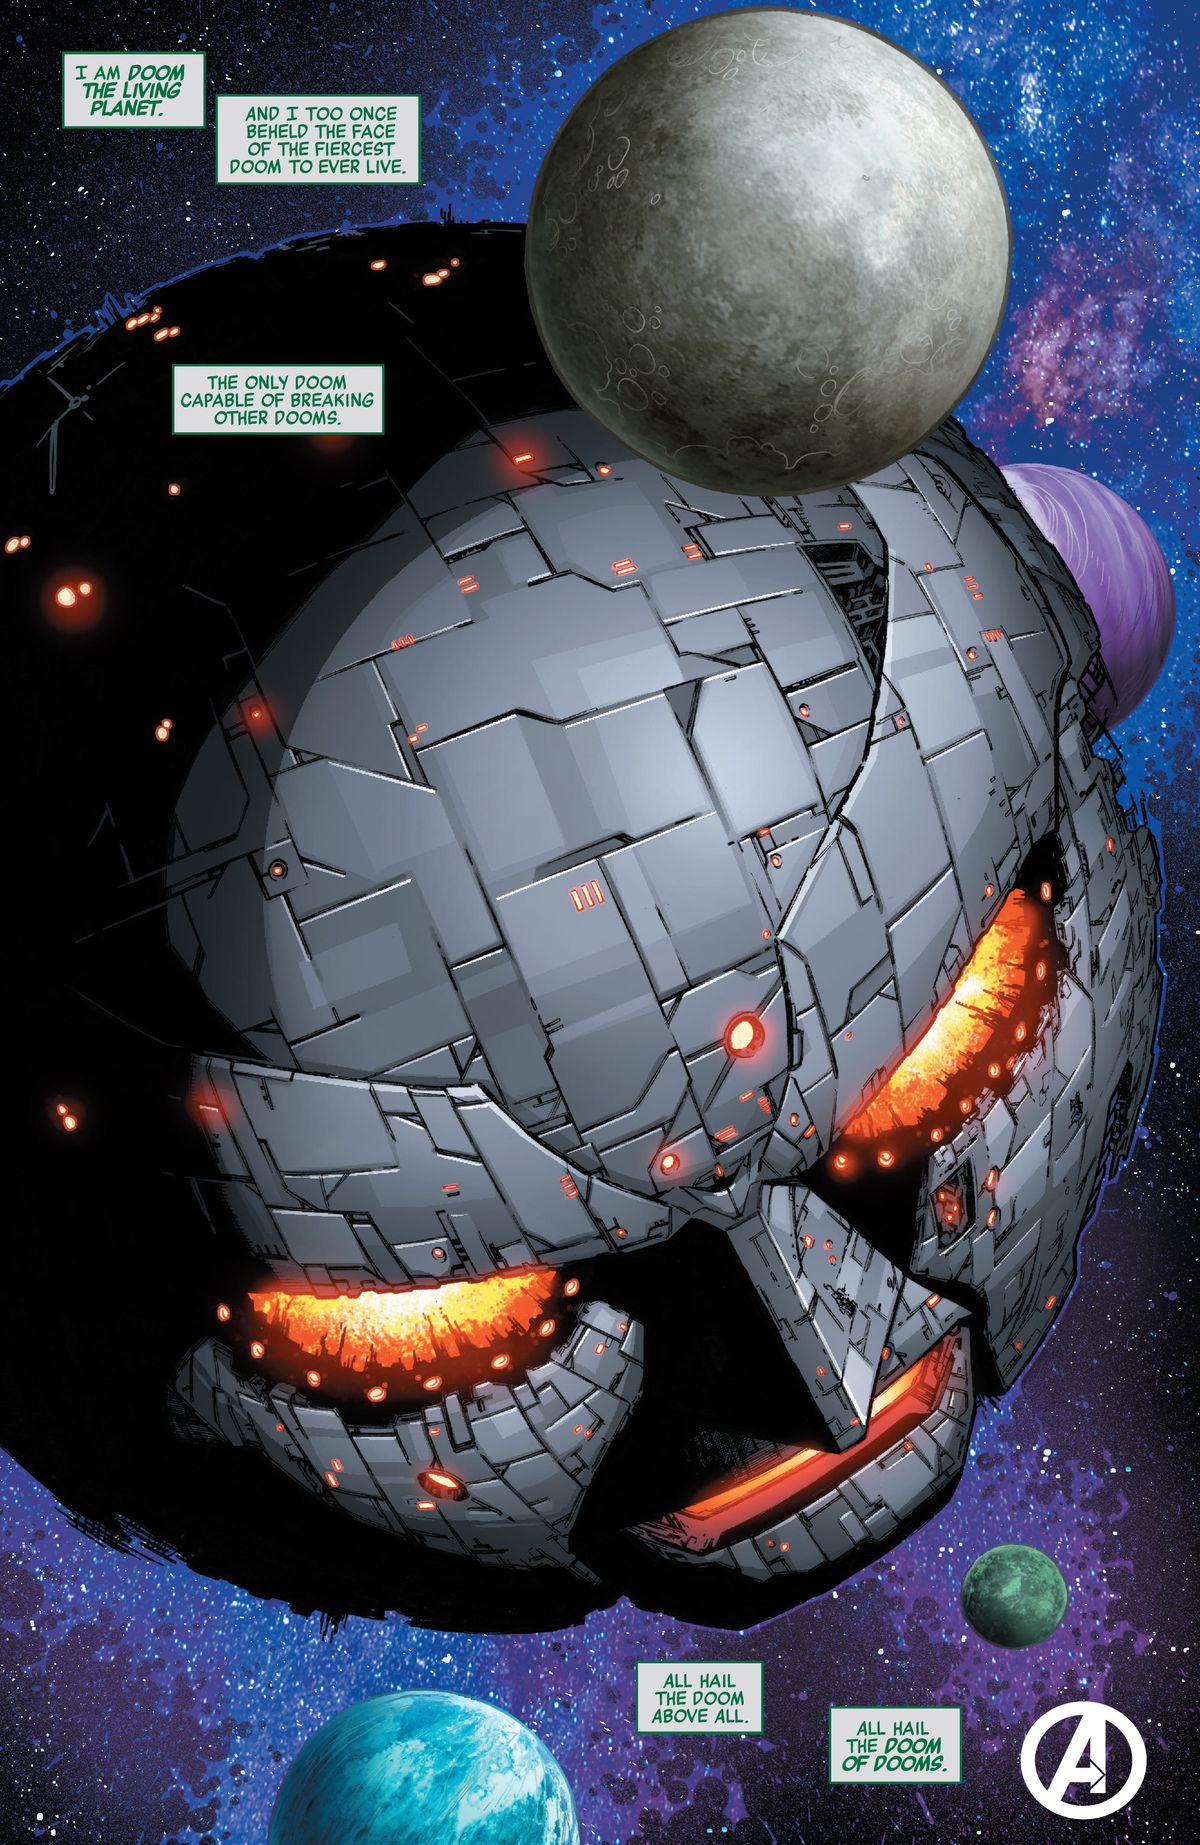 It’s Doctor Doom’s multiverse of madness, and we’re all just living in it